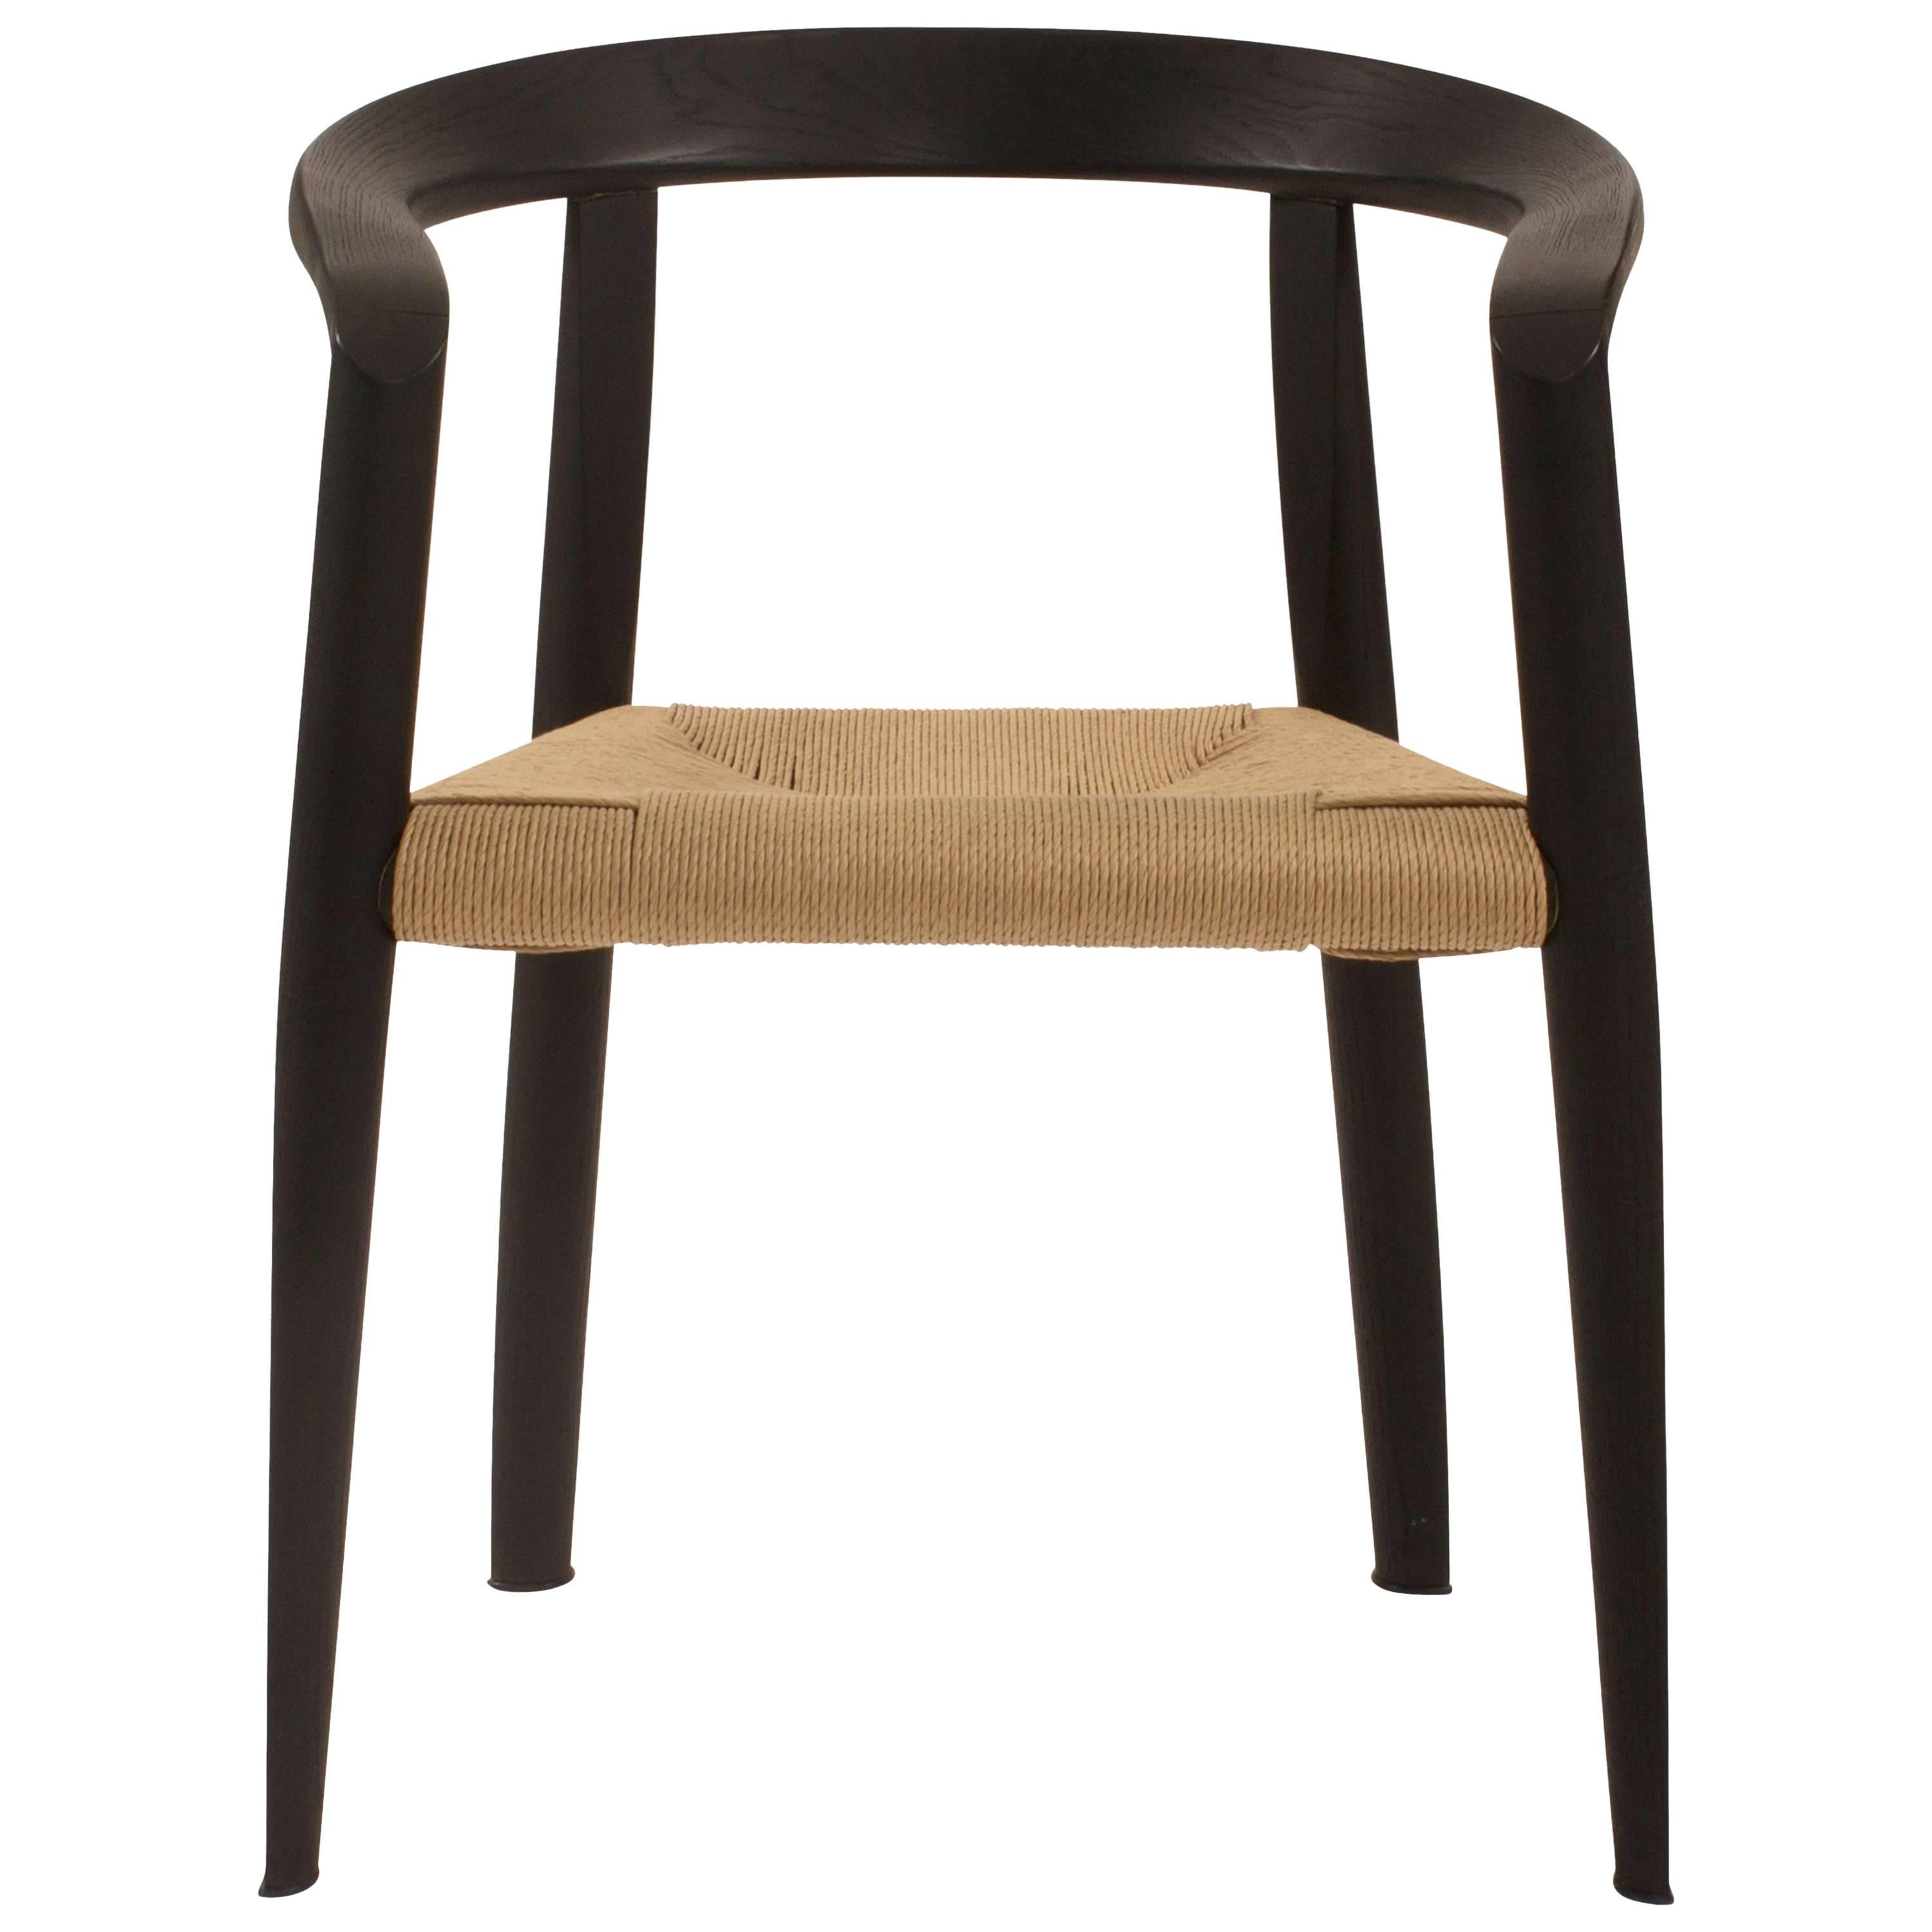 Black Miss Dining Chair with Wicker Seat by Tobia Scarpa for Molteni, Italy